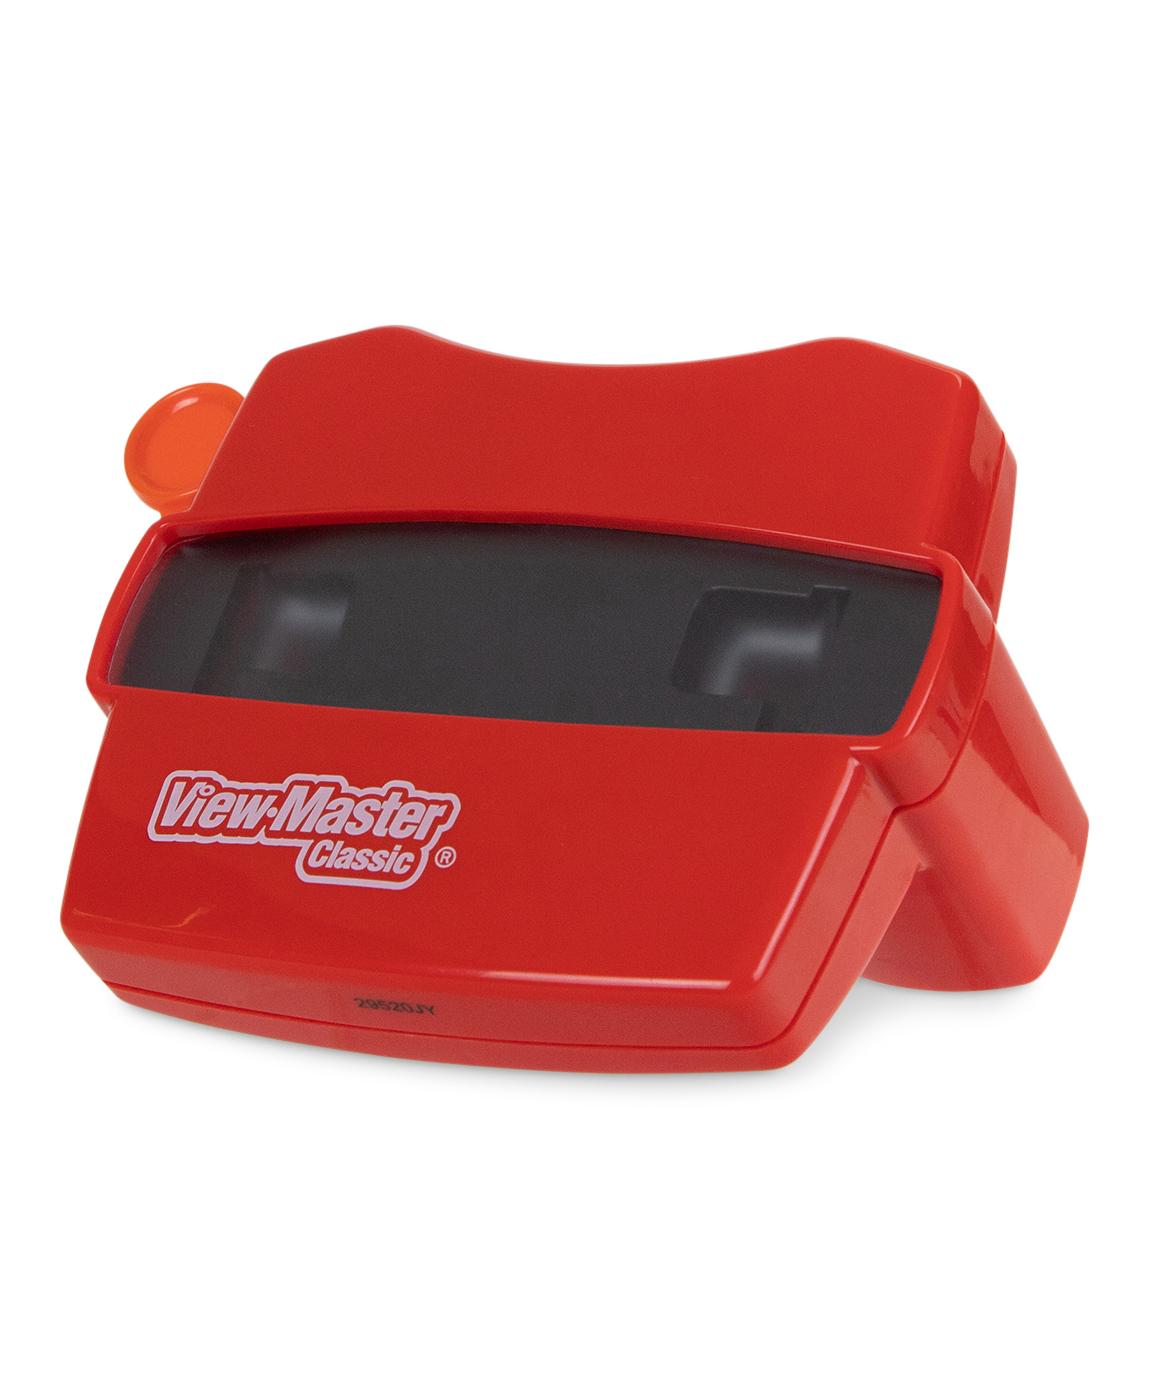 New Discovery Viewmaster Endangered Species includes 2 Reels View Master